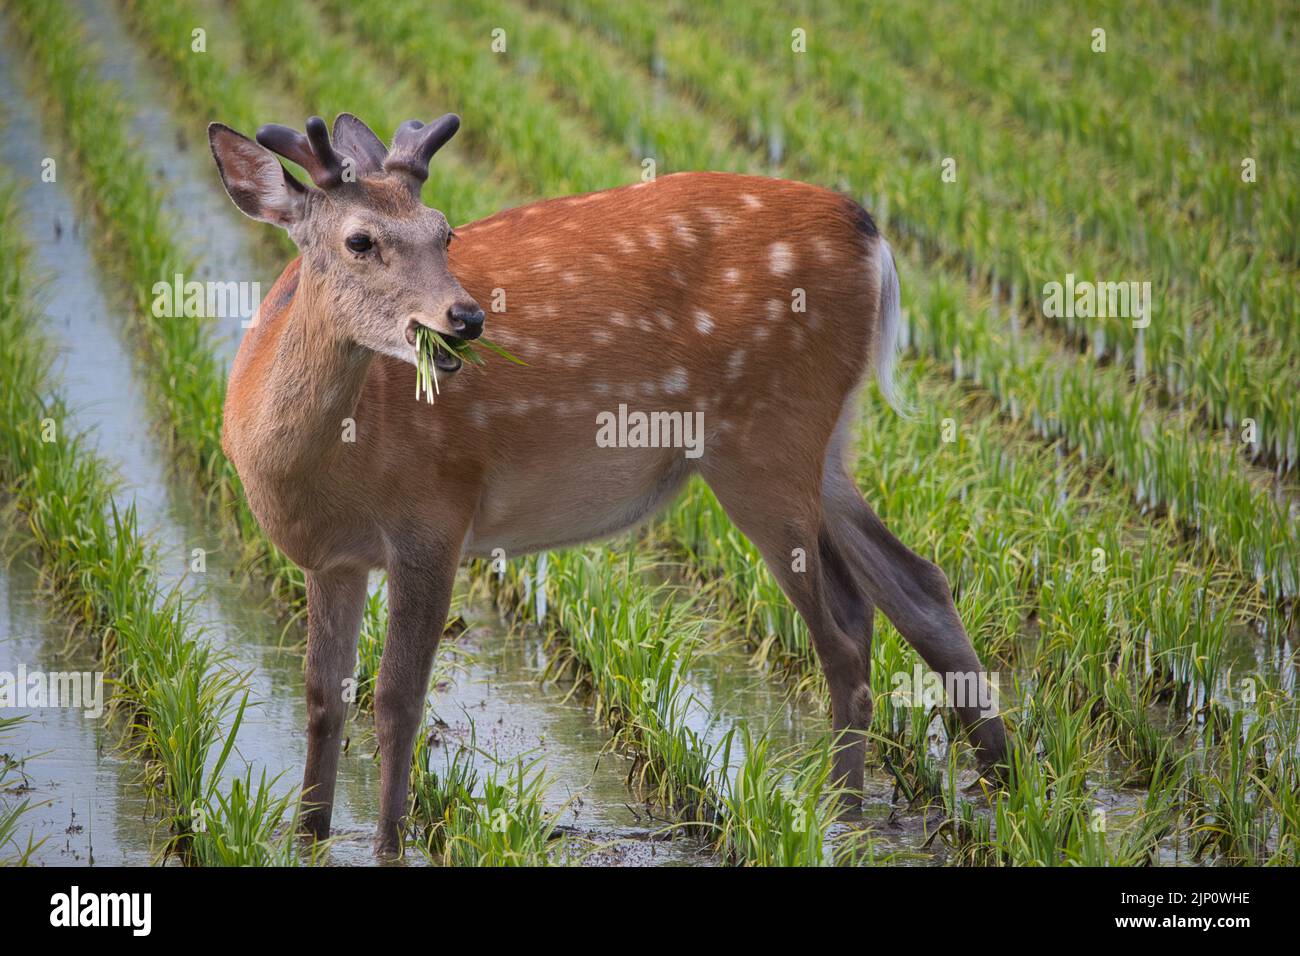 Deer chewing on young rice plants Stock Photo